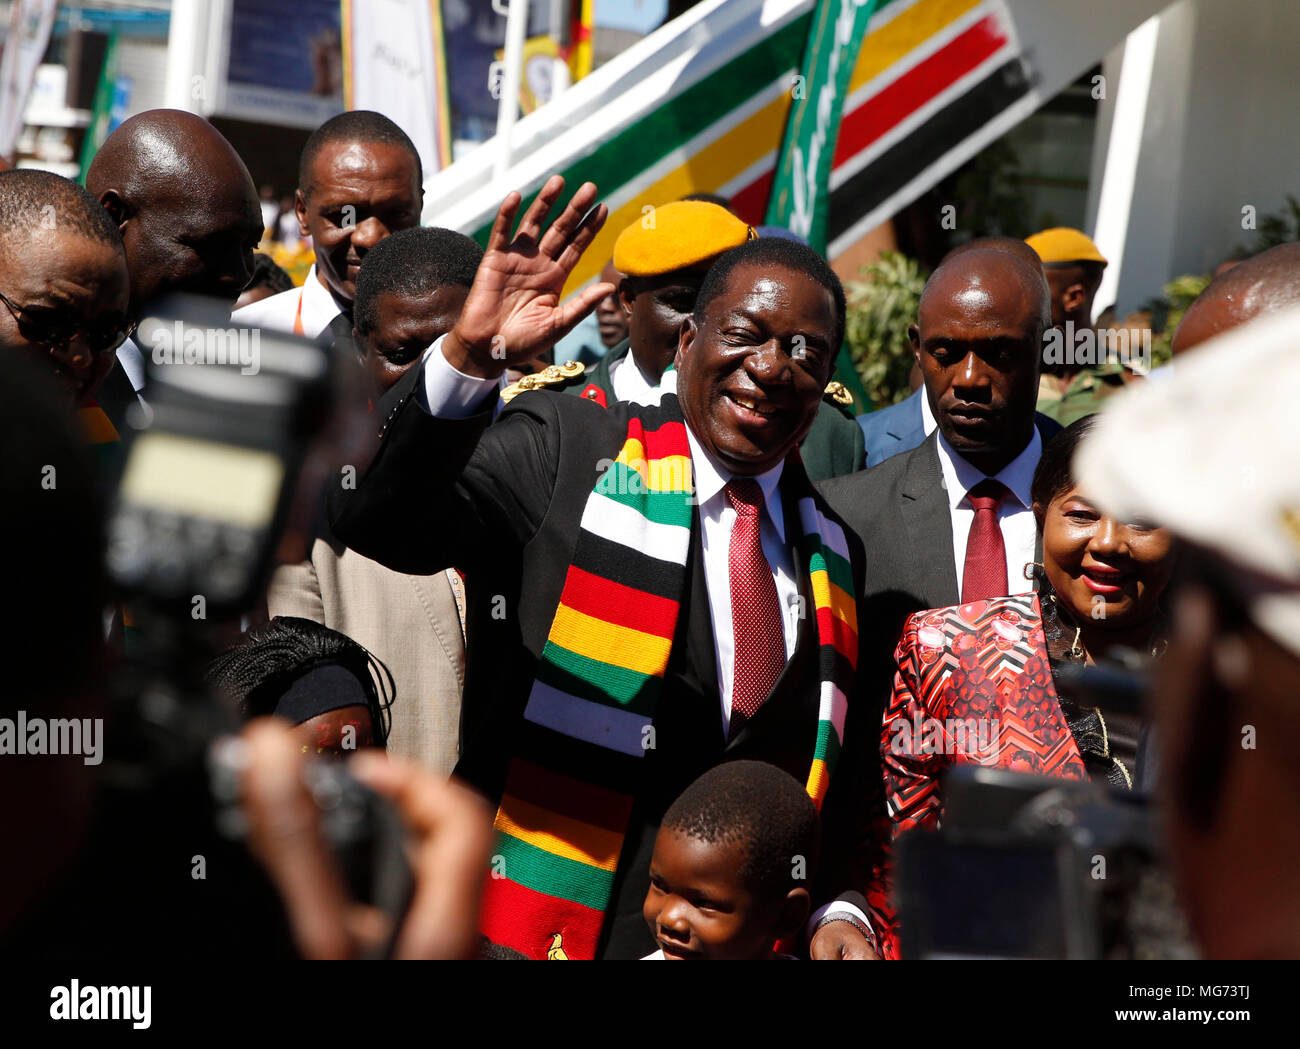 Bulawayo, Zimbabwe. 27th Apr, 2018. Zimbabwe's President Emmerson Mnangagwa (C) visits the 59th edition of the Zimbabwe International Trade Fair (ZITF) in Bulawayo, Zimbabwe, April 27, 2018. Zimbabwe's President Emmerson Mnangagwa has urged public officials to adopt a new culture of facilitating economic growth in the country, warning that incompetent people will not be tolerated in the new political dispensation. Credit: Shaun Jusa/Xinhua/Alamy Live News Stock Photo